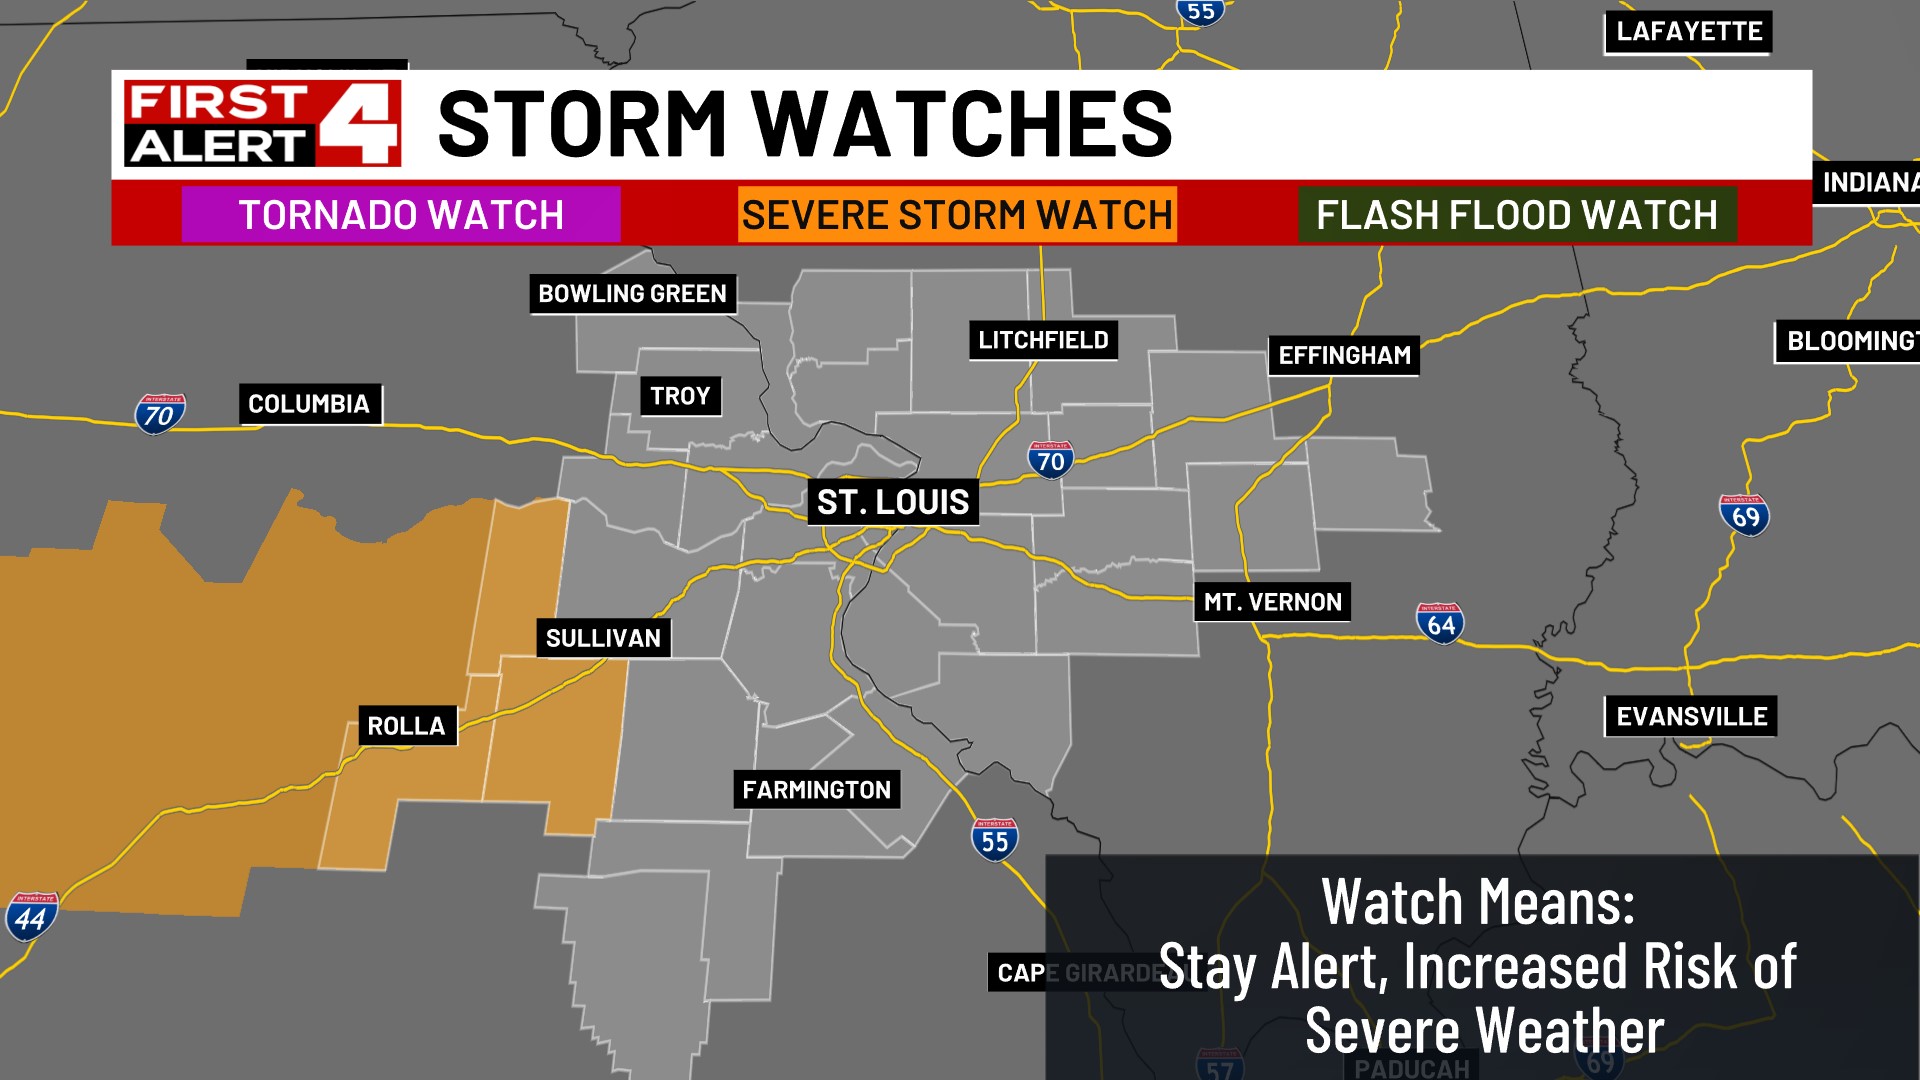 Severe Watches